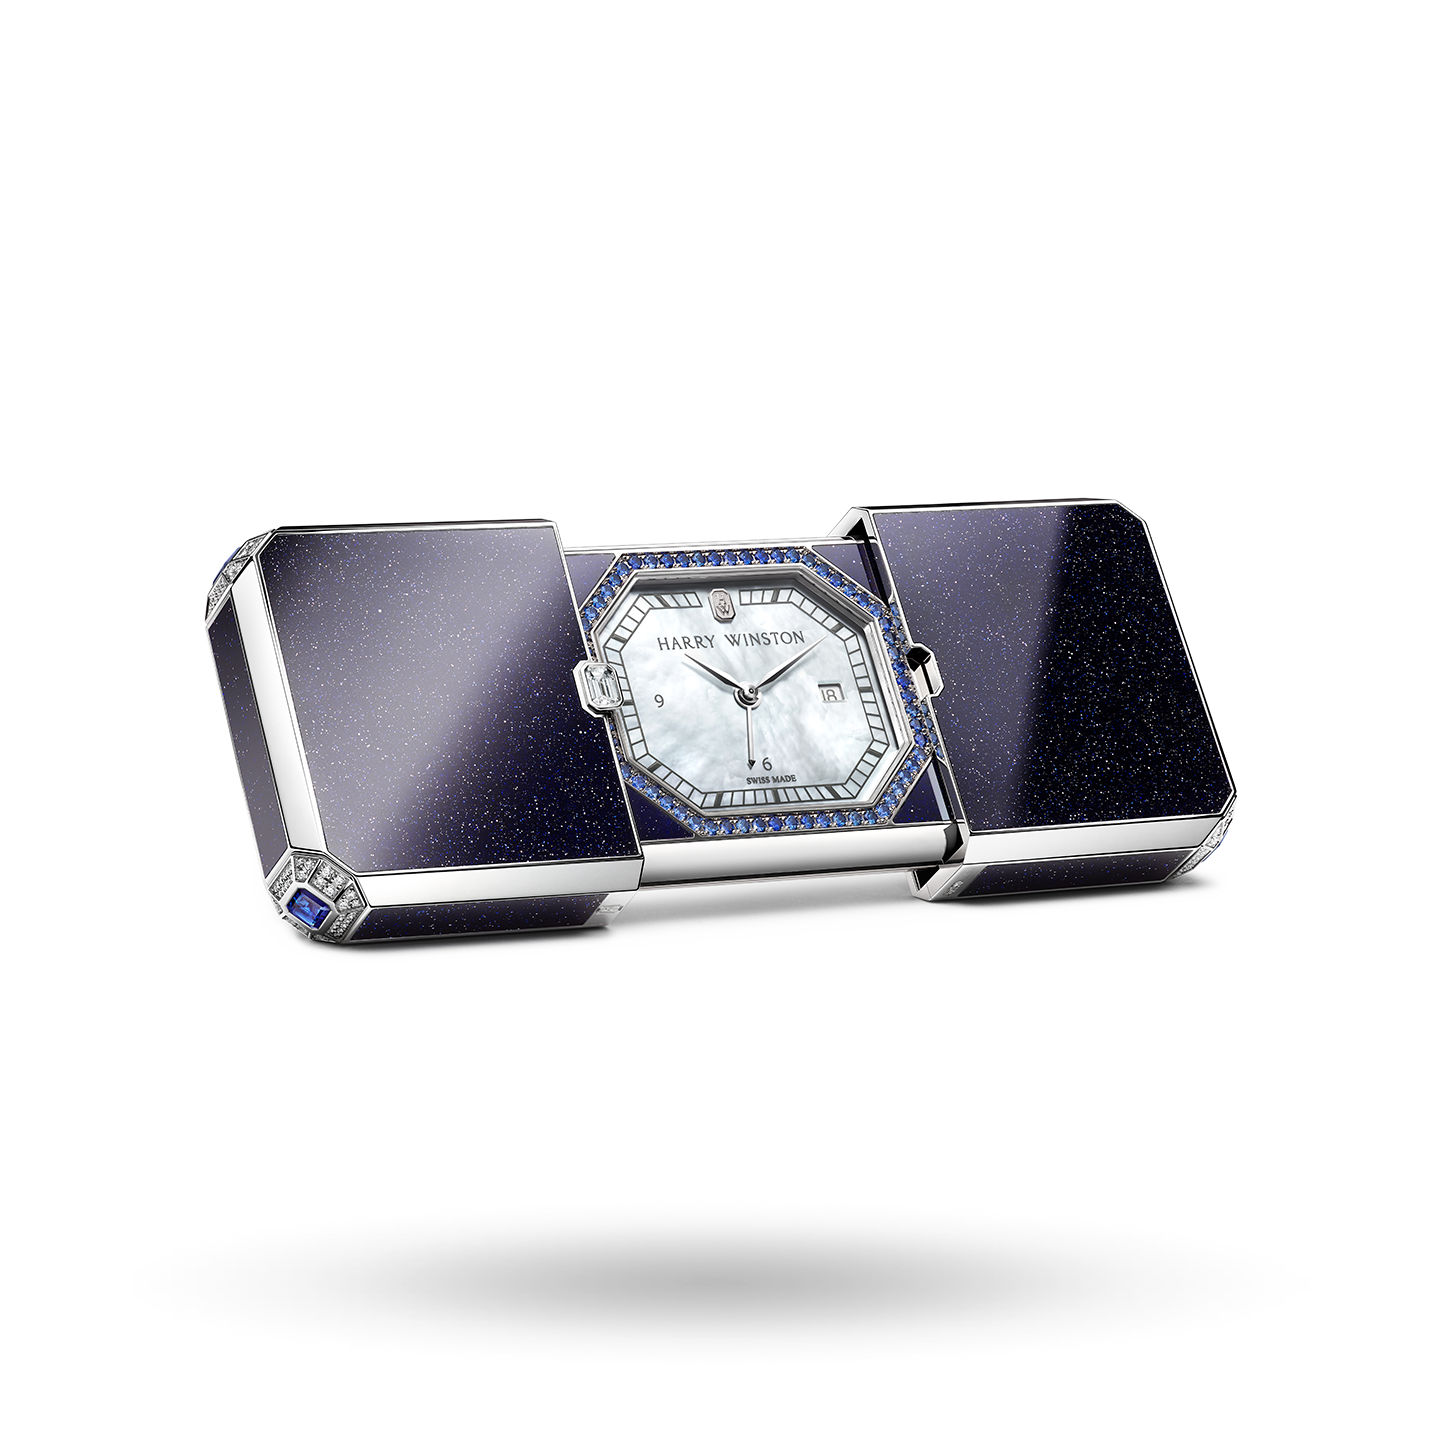 Travel Time by Harry Winston, product image 1